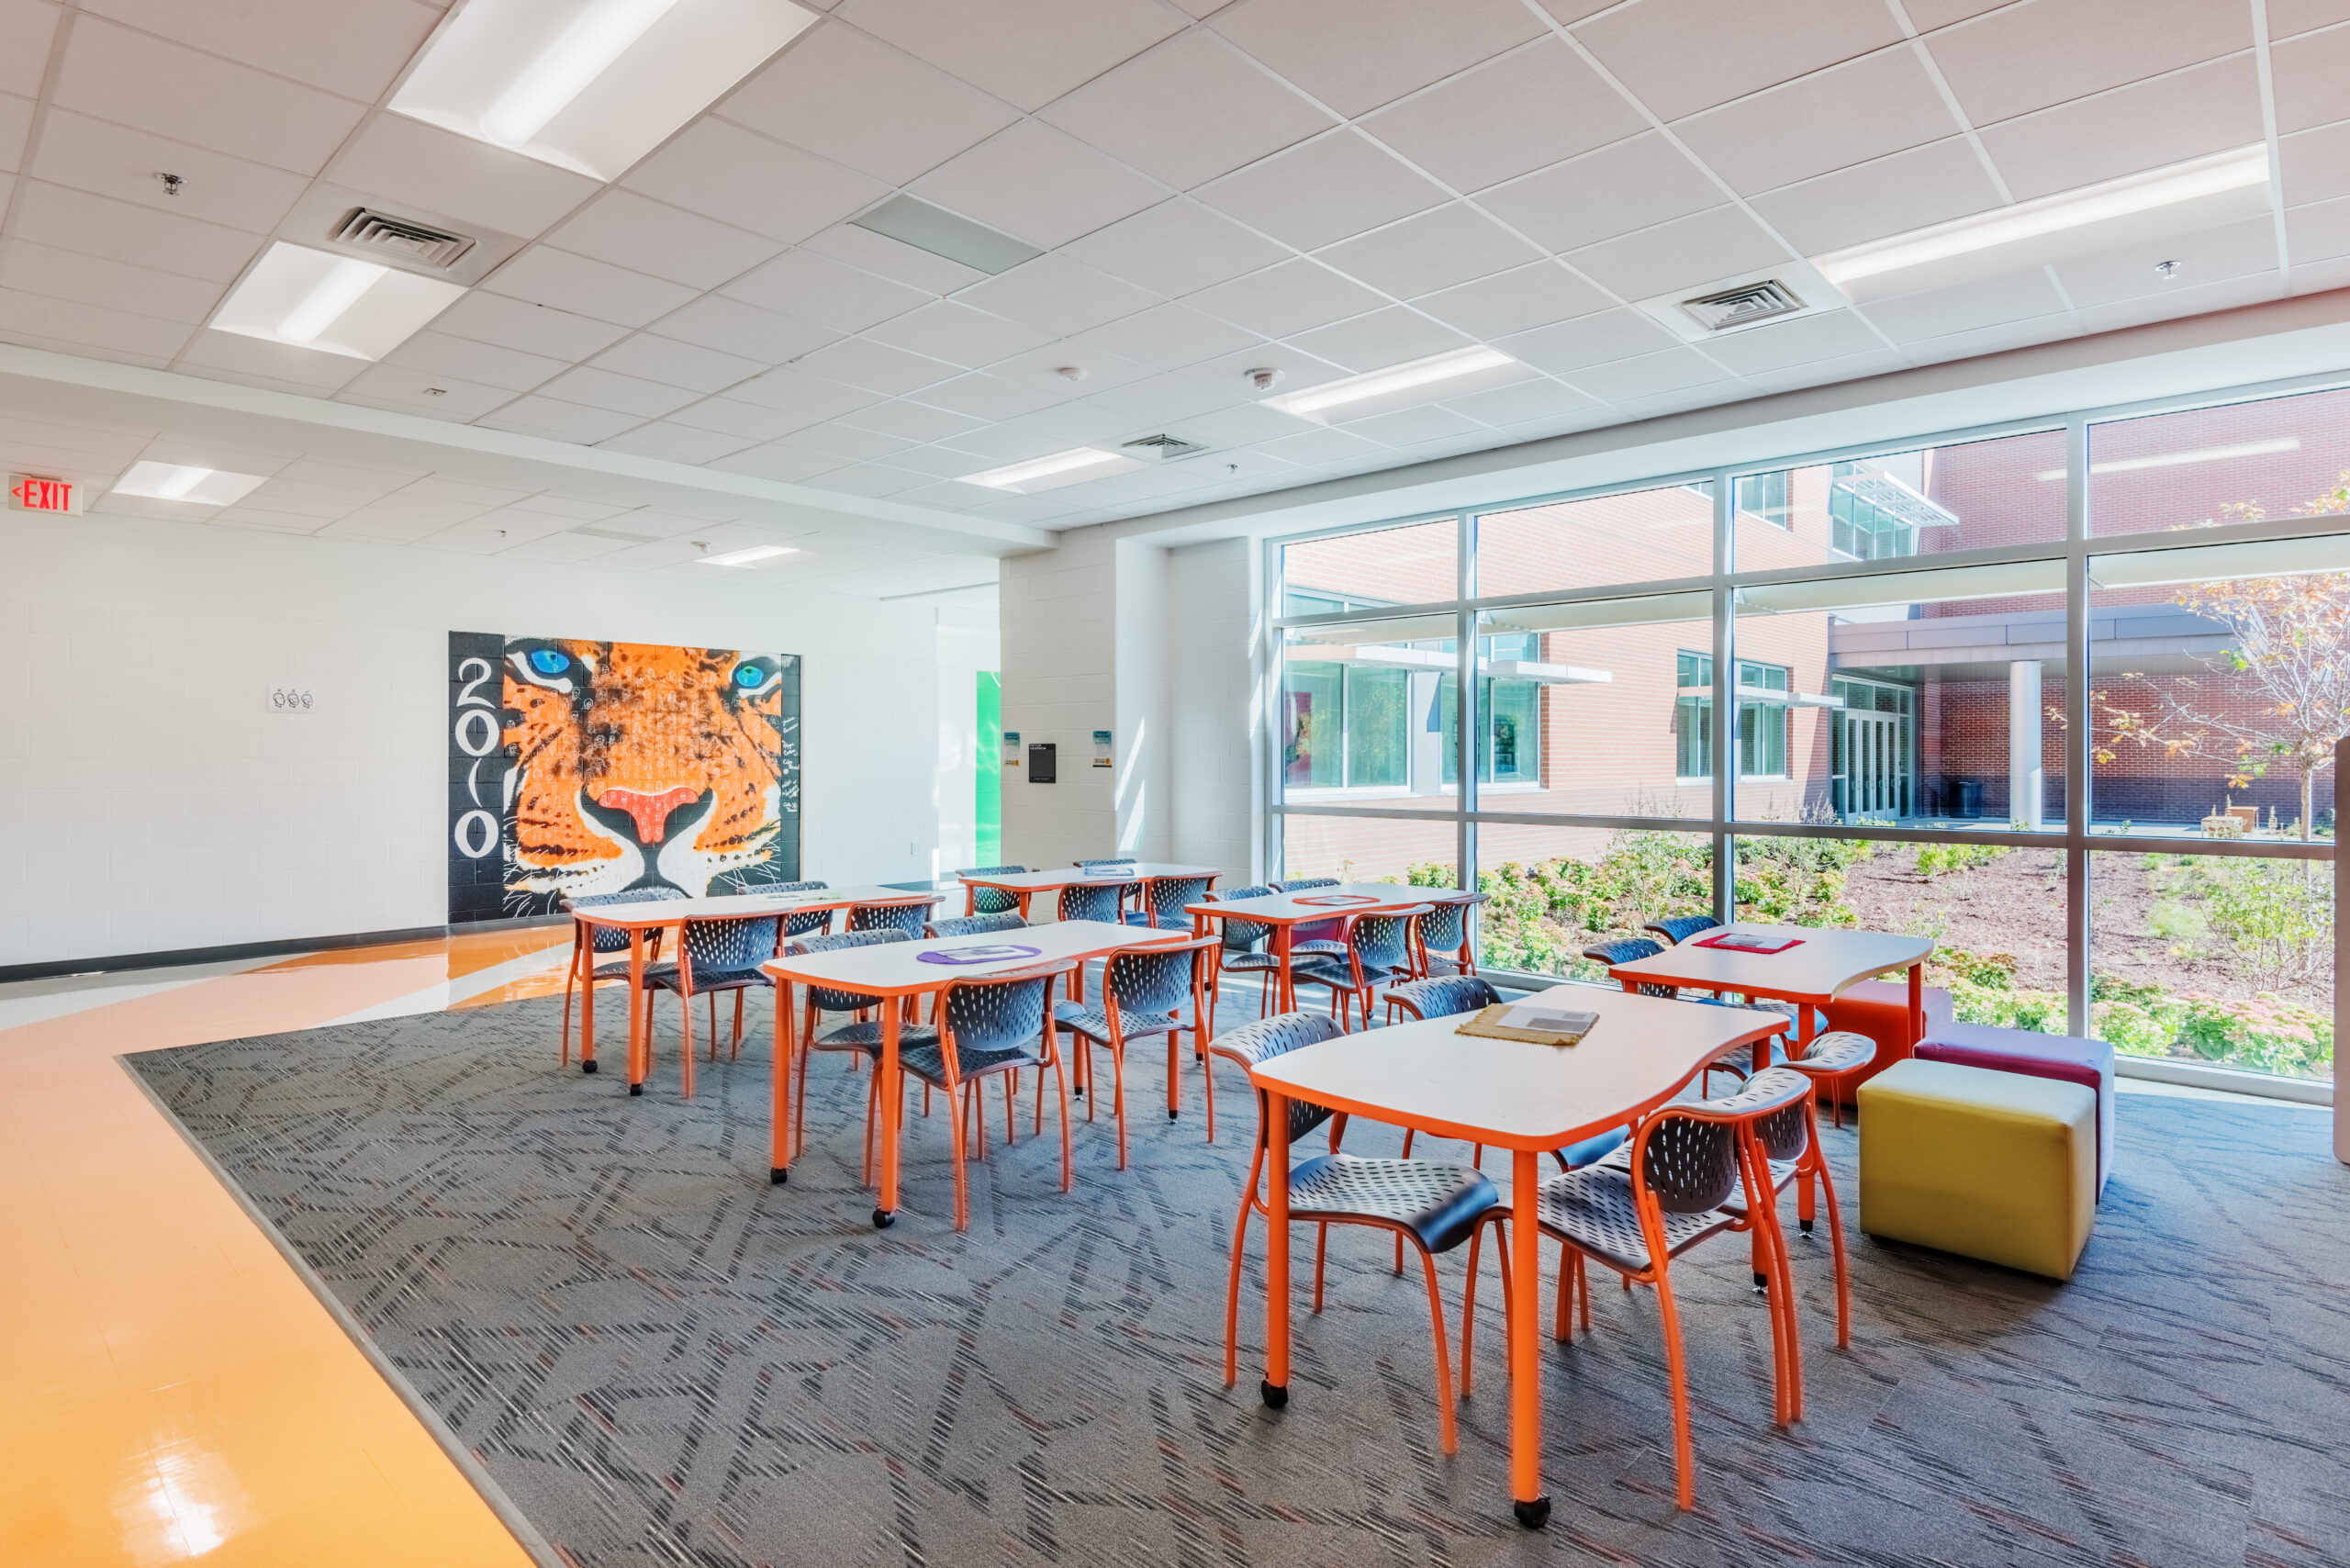 Fuquay-Varina High School Collaborative Workspace with Orange Tables and Chairs and a Bengal Painting on the Wall